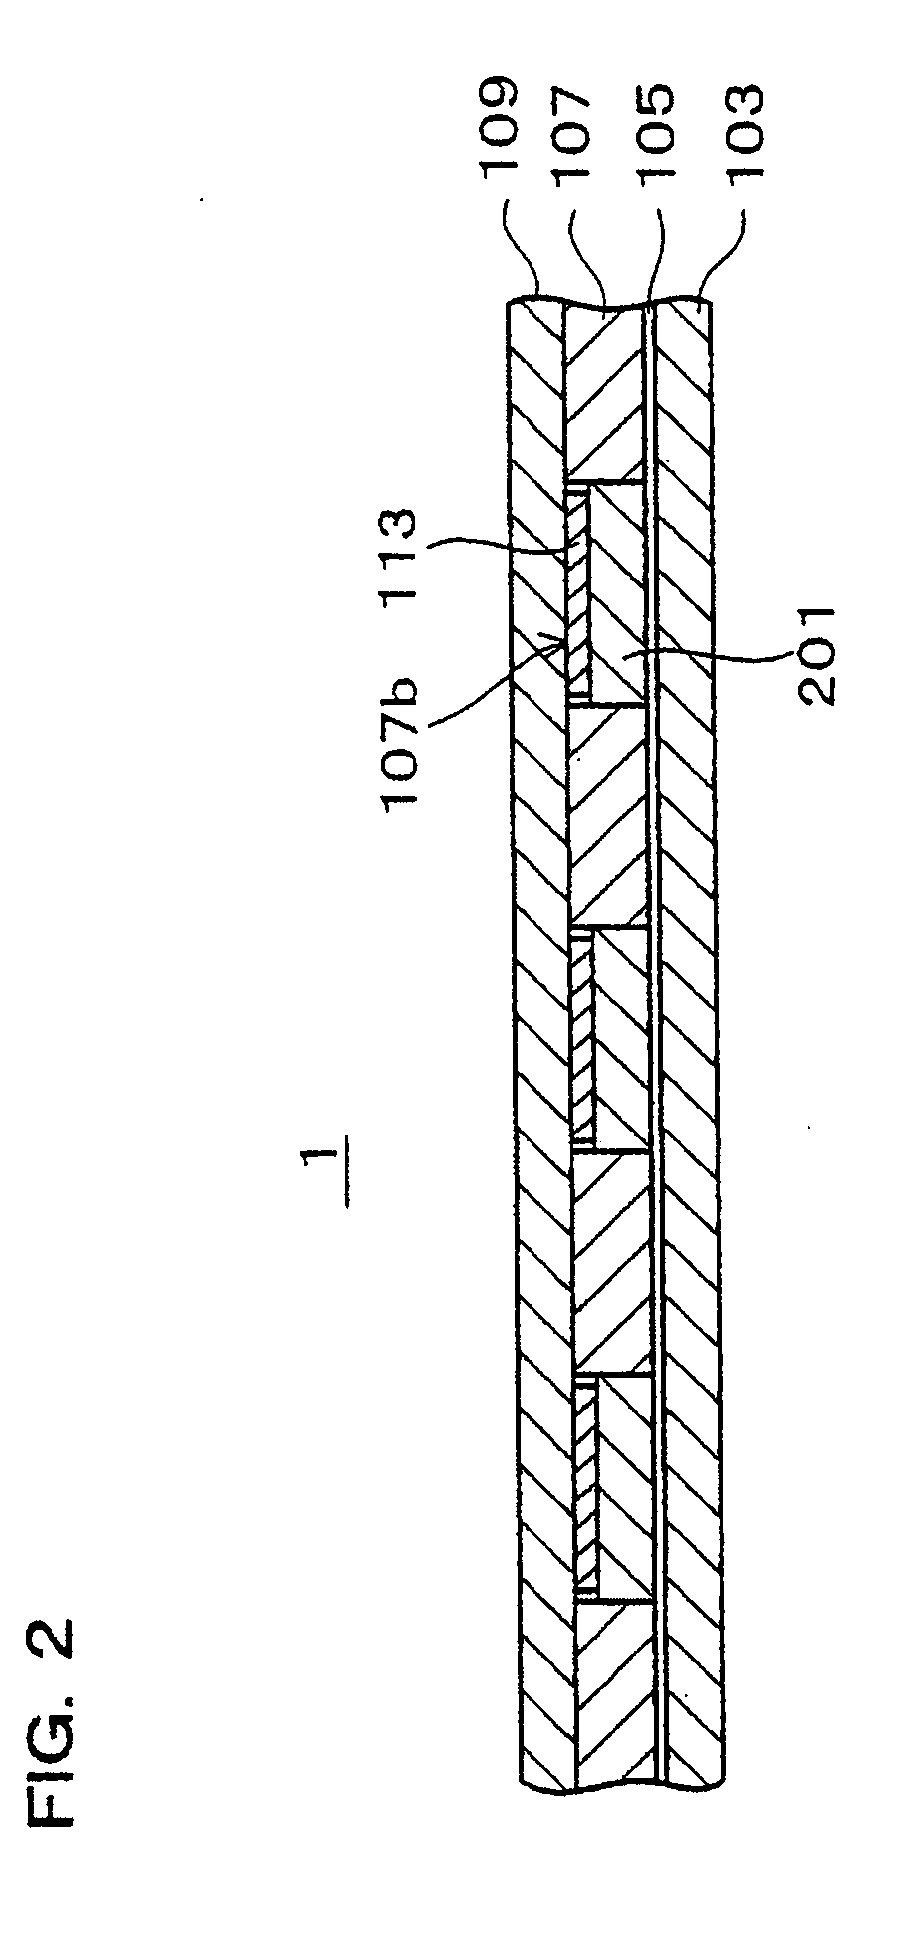 Method of testing circuit elements on a semiconductor wafer